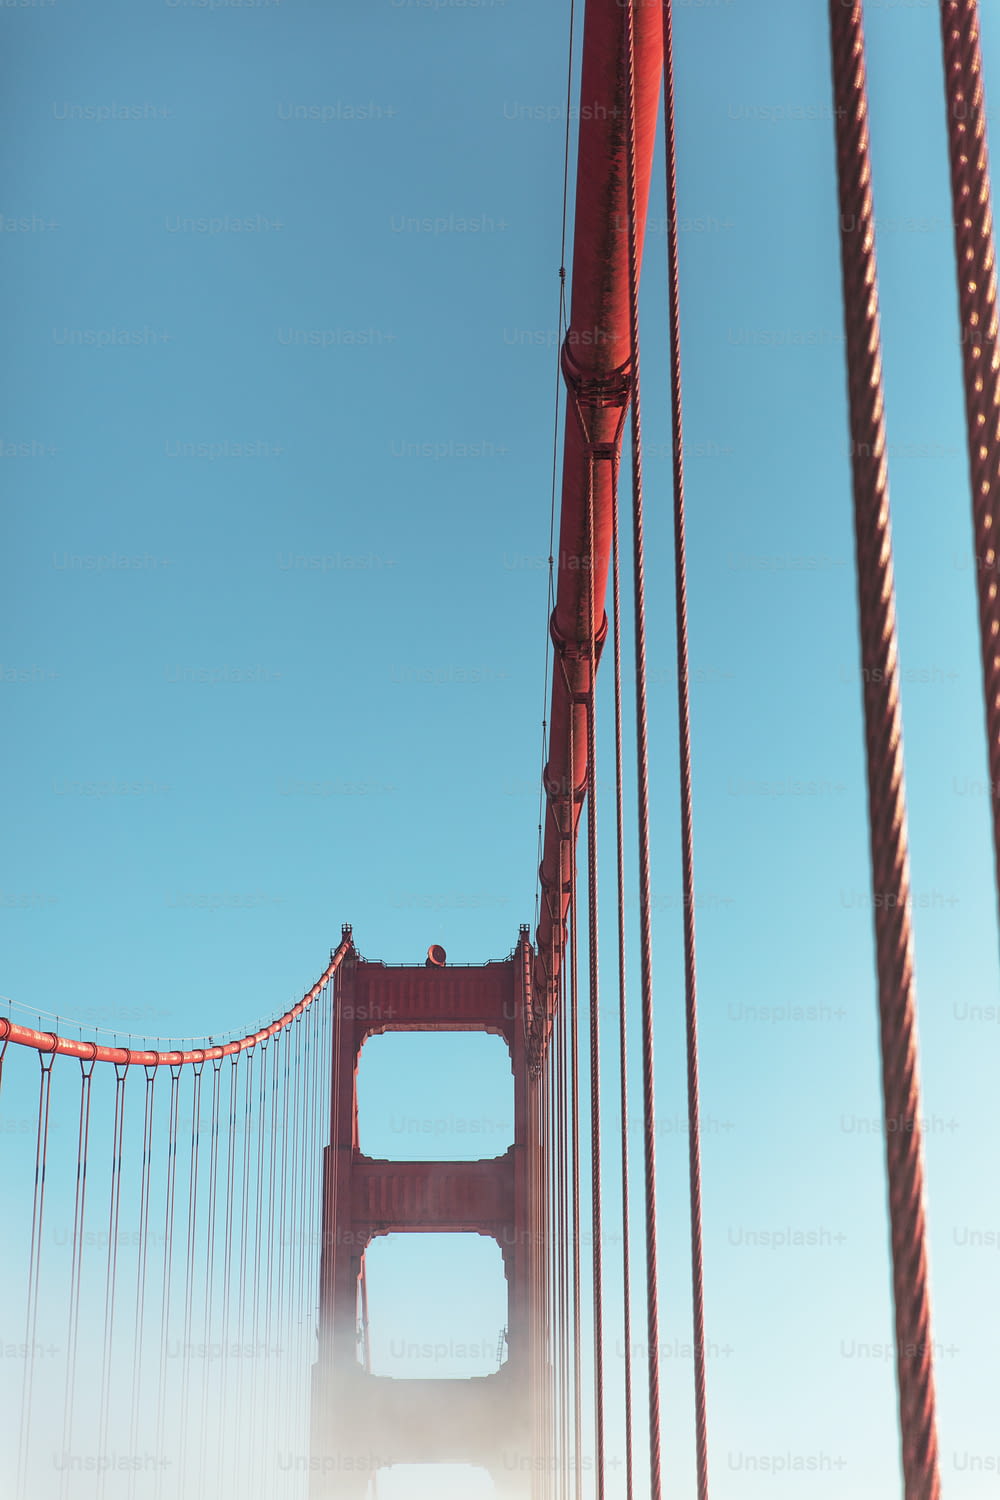 a view of the golden gate bridge from below